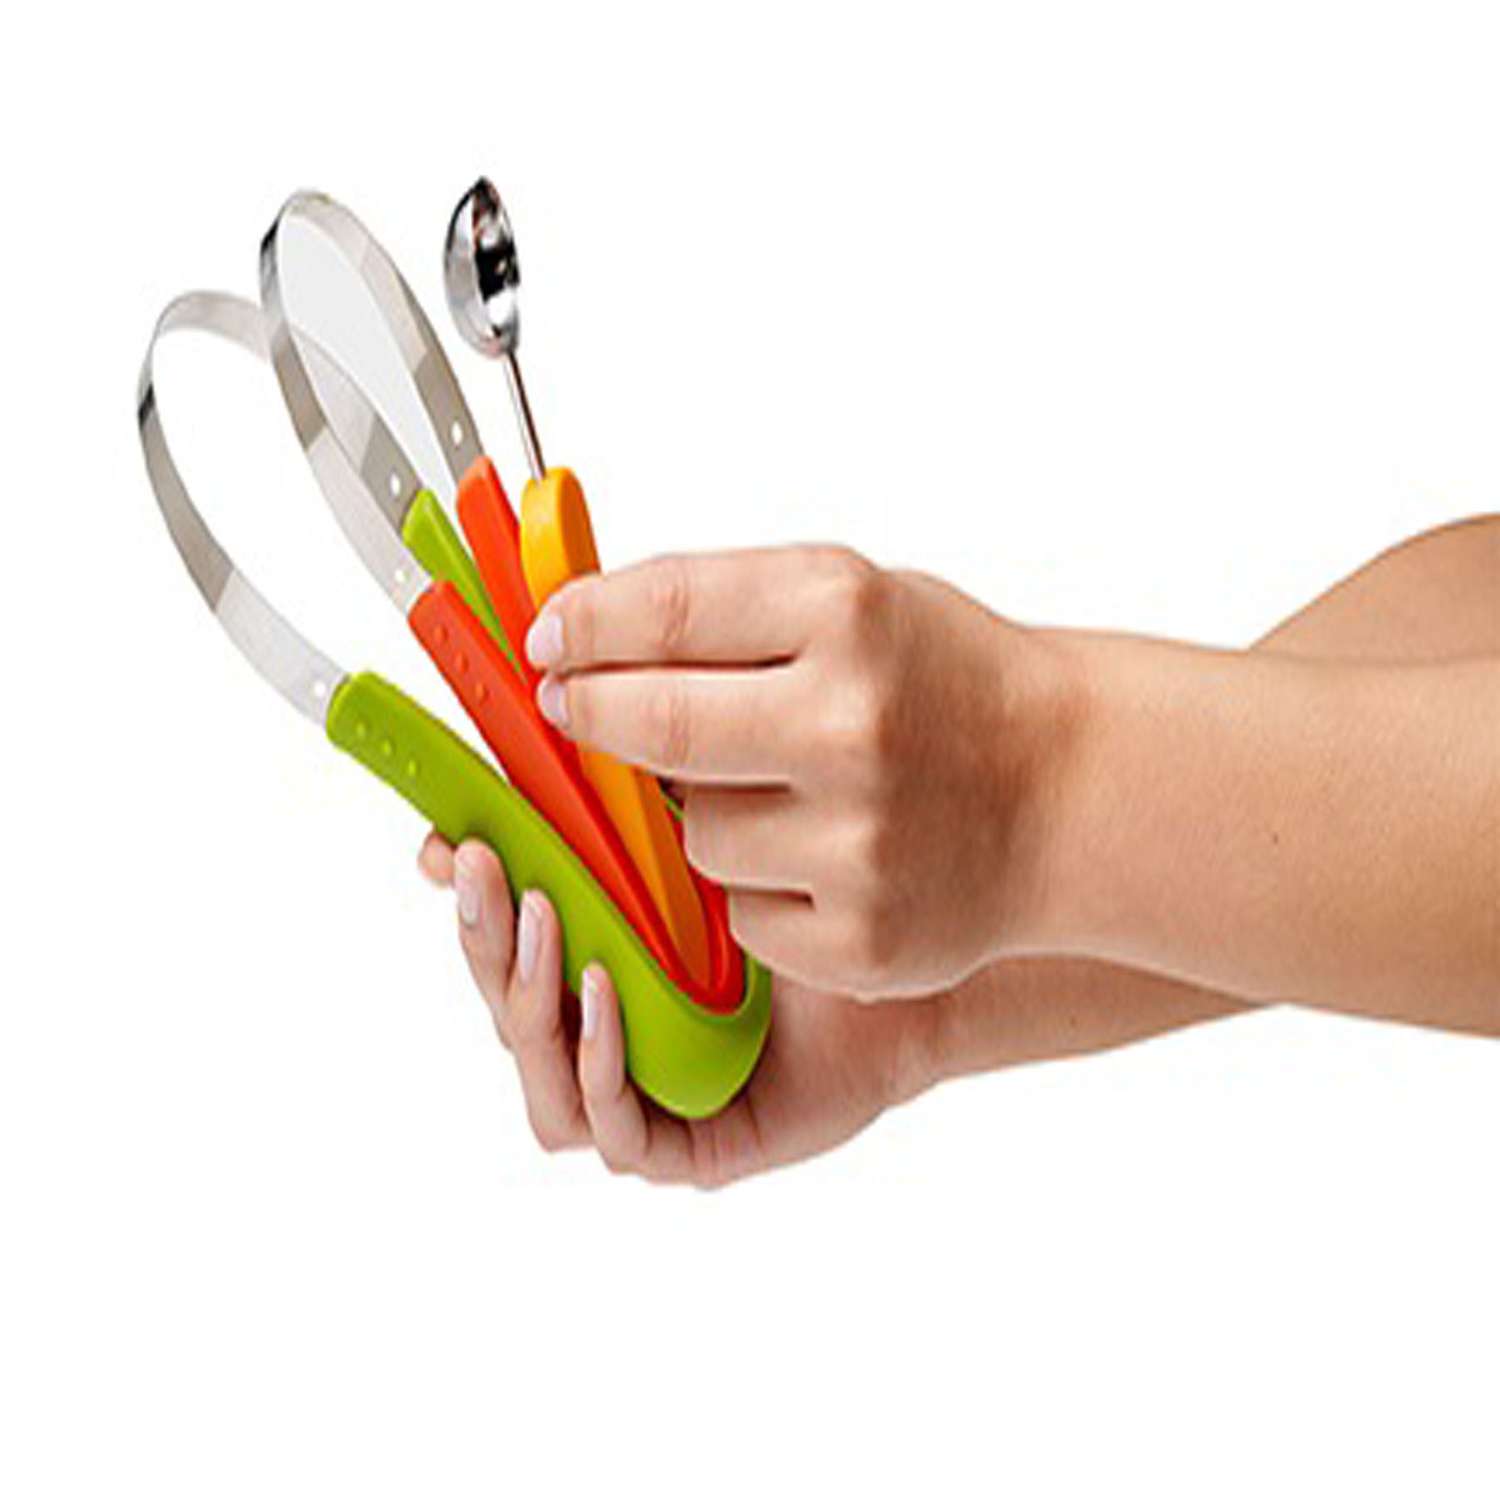 Multicolor Stainless Steel 3 in 1 Fruit Scooper Tool, Seed Remover